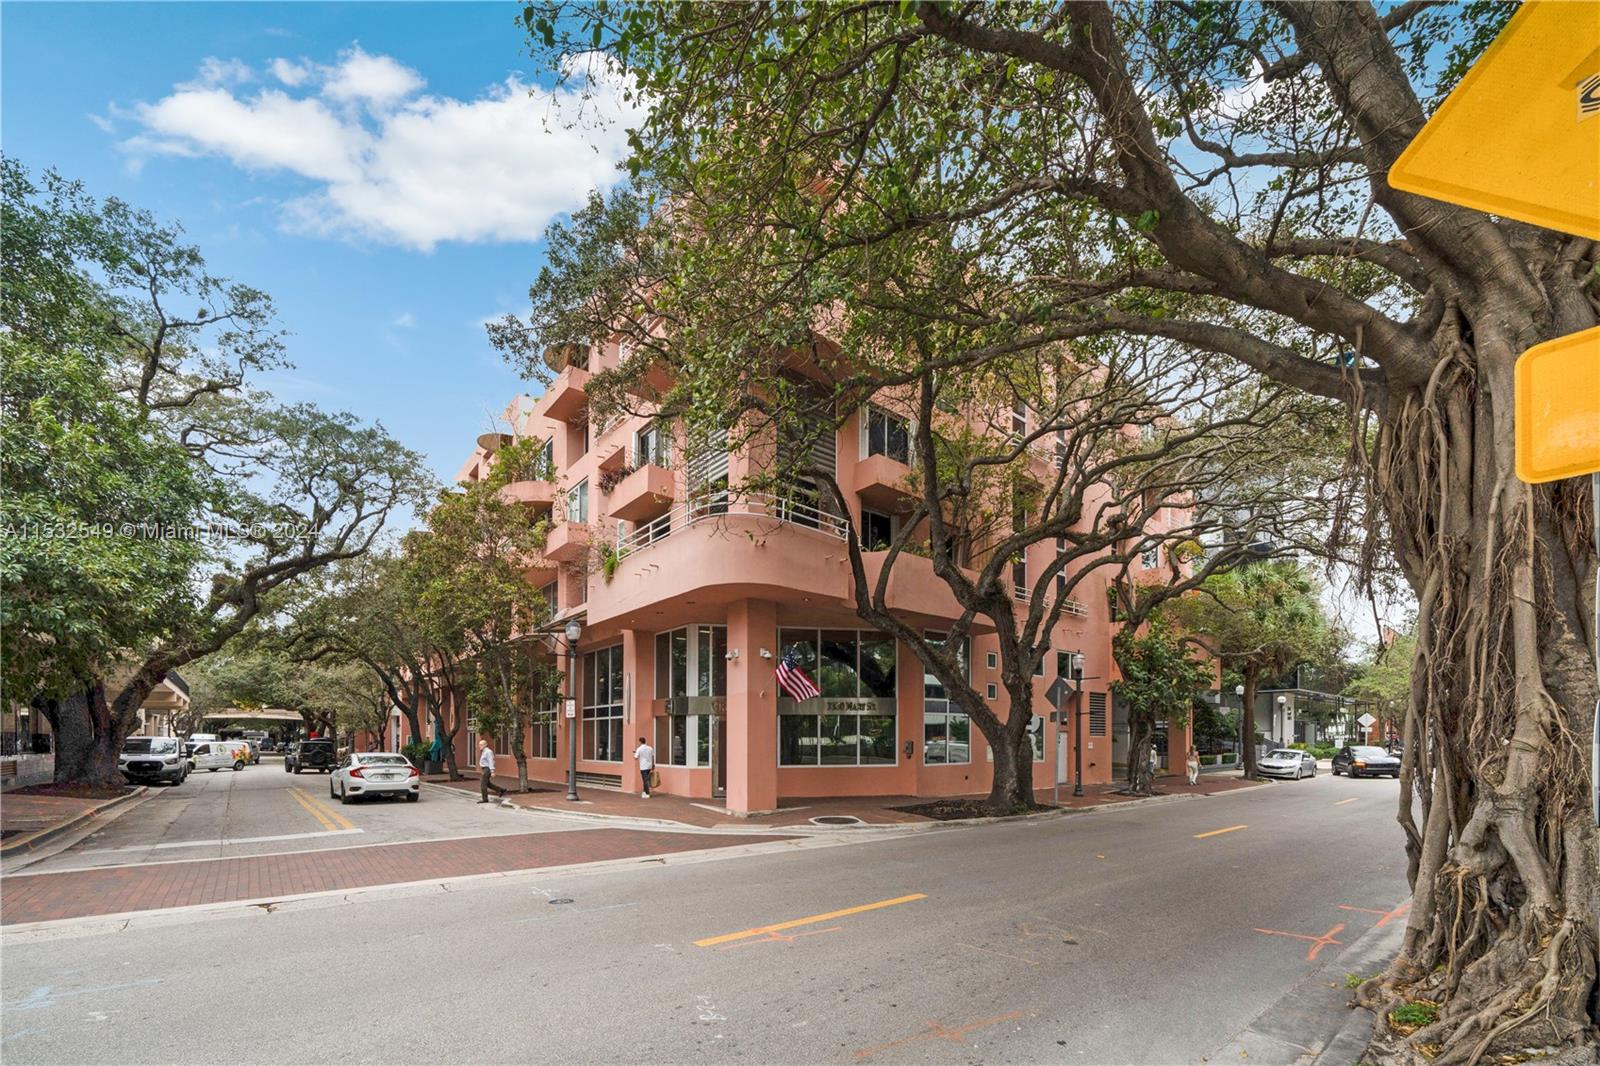 Wonderful location! Embrace the charm and excitement of Coconut Grove, surrounded by stunning scenery and abundant entertainment options. From restaurants and markets to cafes and nature trails, everything you need is just steps away from your doorstep. This delightful and inviting two-story, one-bedroom apartment exudes the ambiance of a townhouse. Recently renovated, the first floor welcomes you with a beautiful kitchen, dining area, living room, and convenient half bathroom. Upstairs, the spacious bedroom boasts ample closet space, ideal for creating an office nook, along with a full bathroom featuring a walk-in shower, toilet, and sink. Enjoy parks and waterfront vistas within easy walking distance.